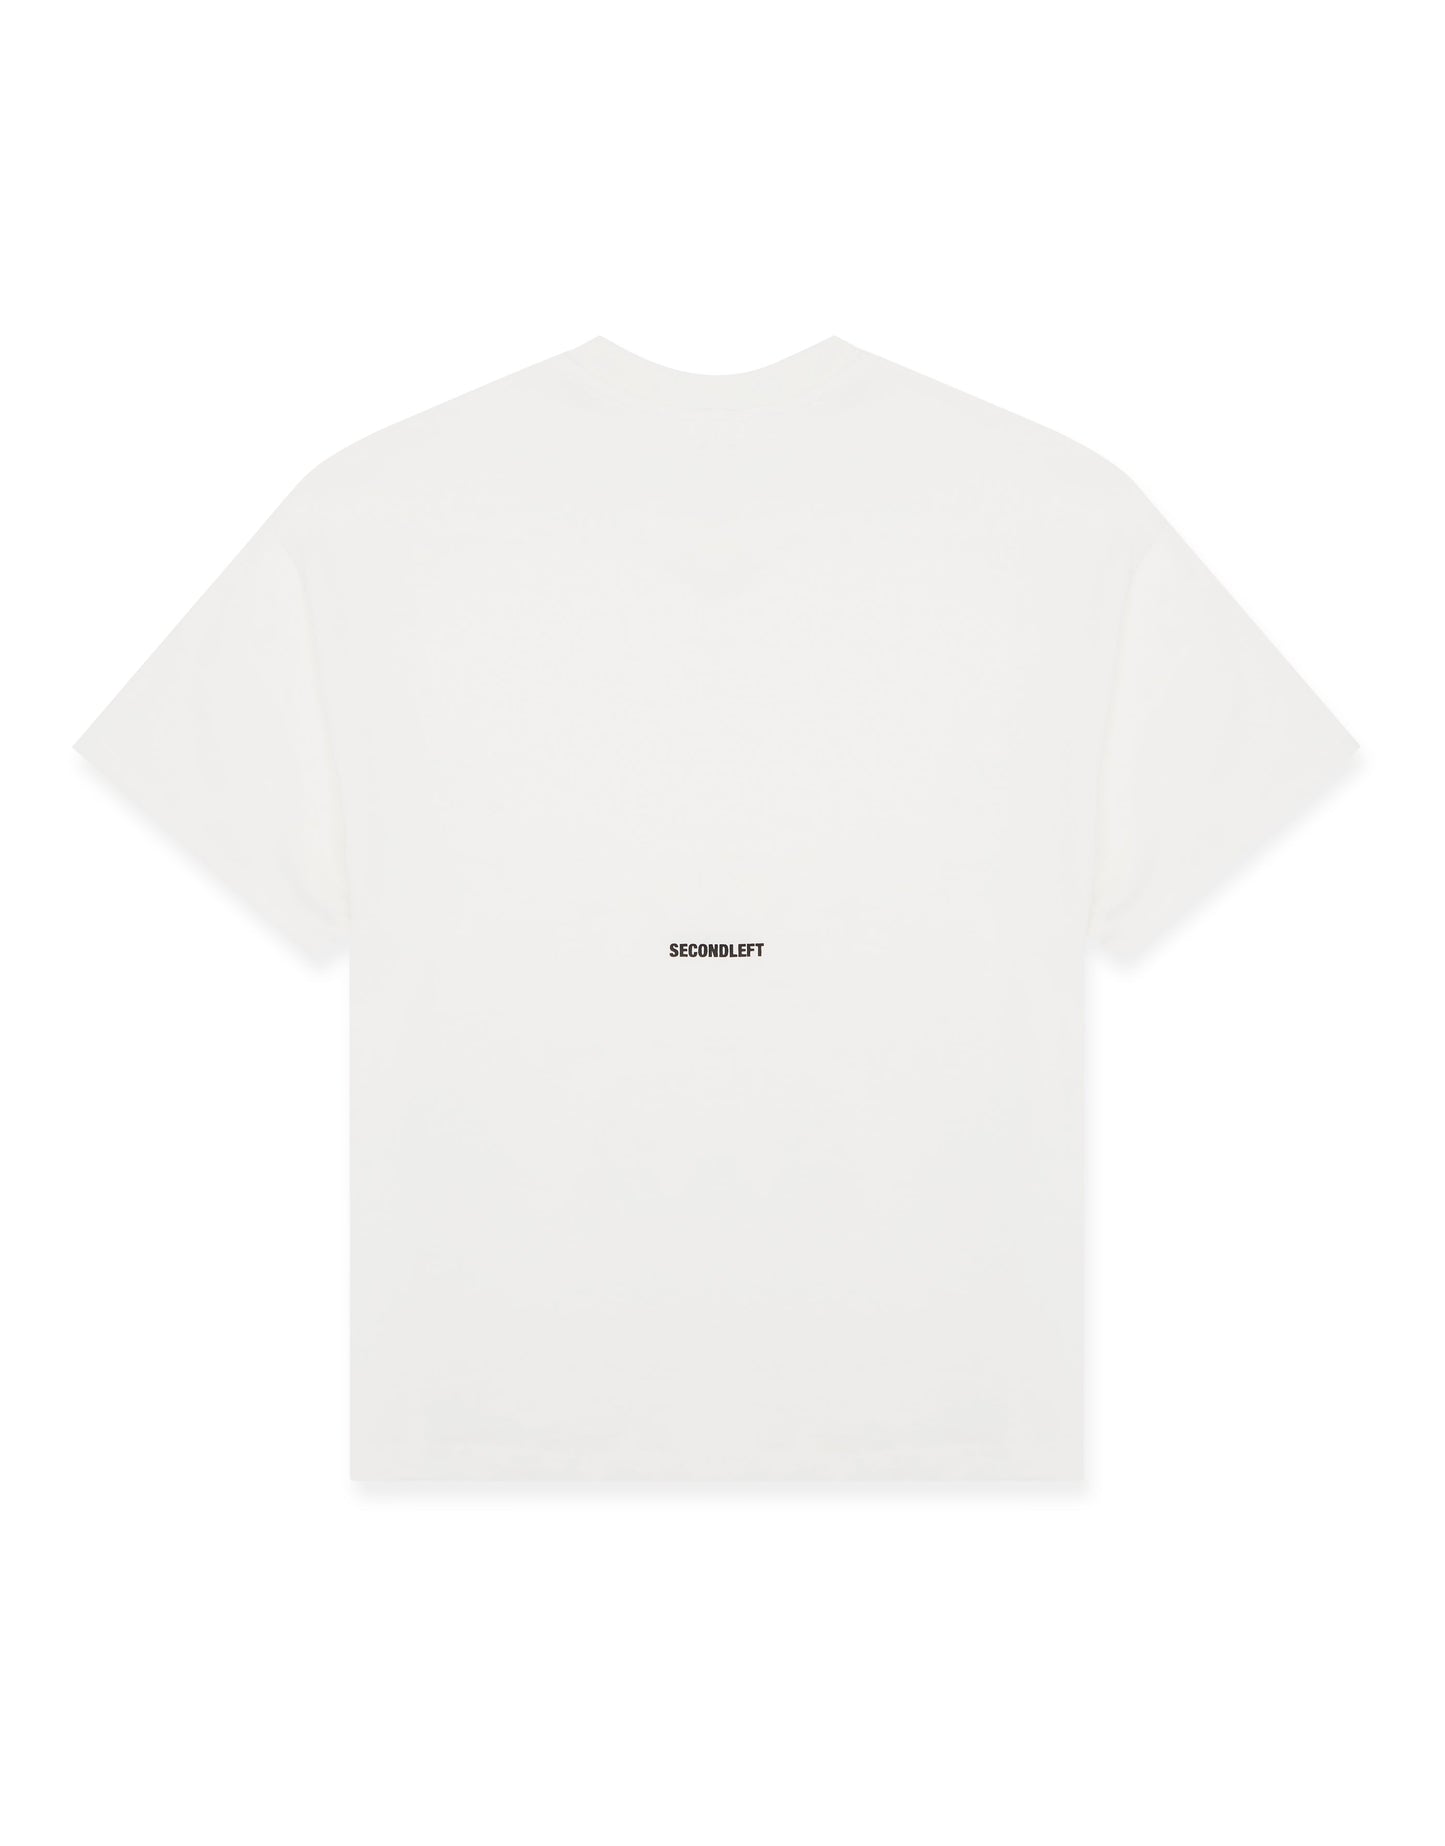 SL Cropped Classic Tee - White